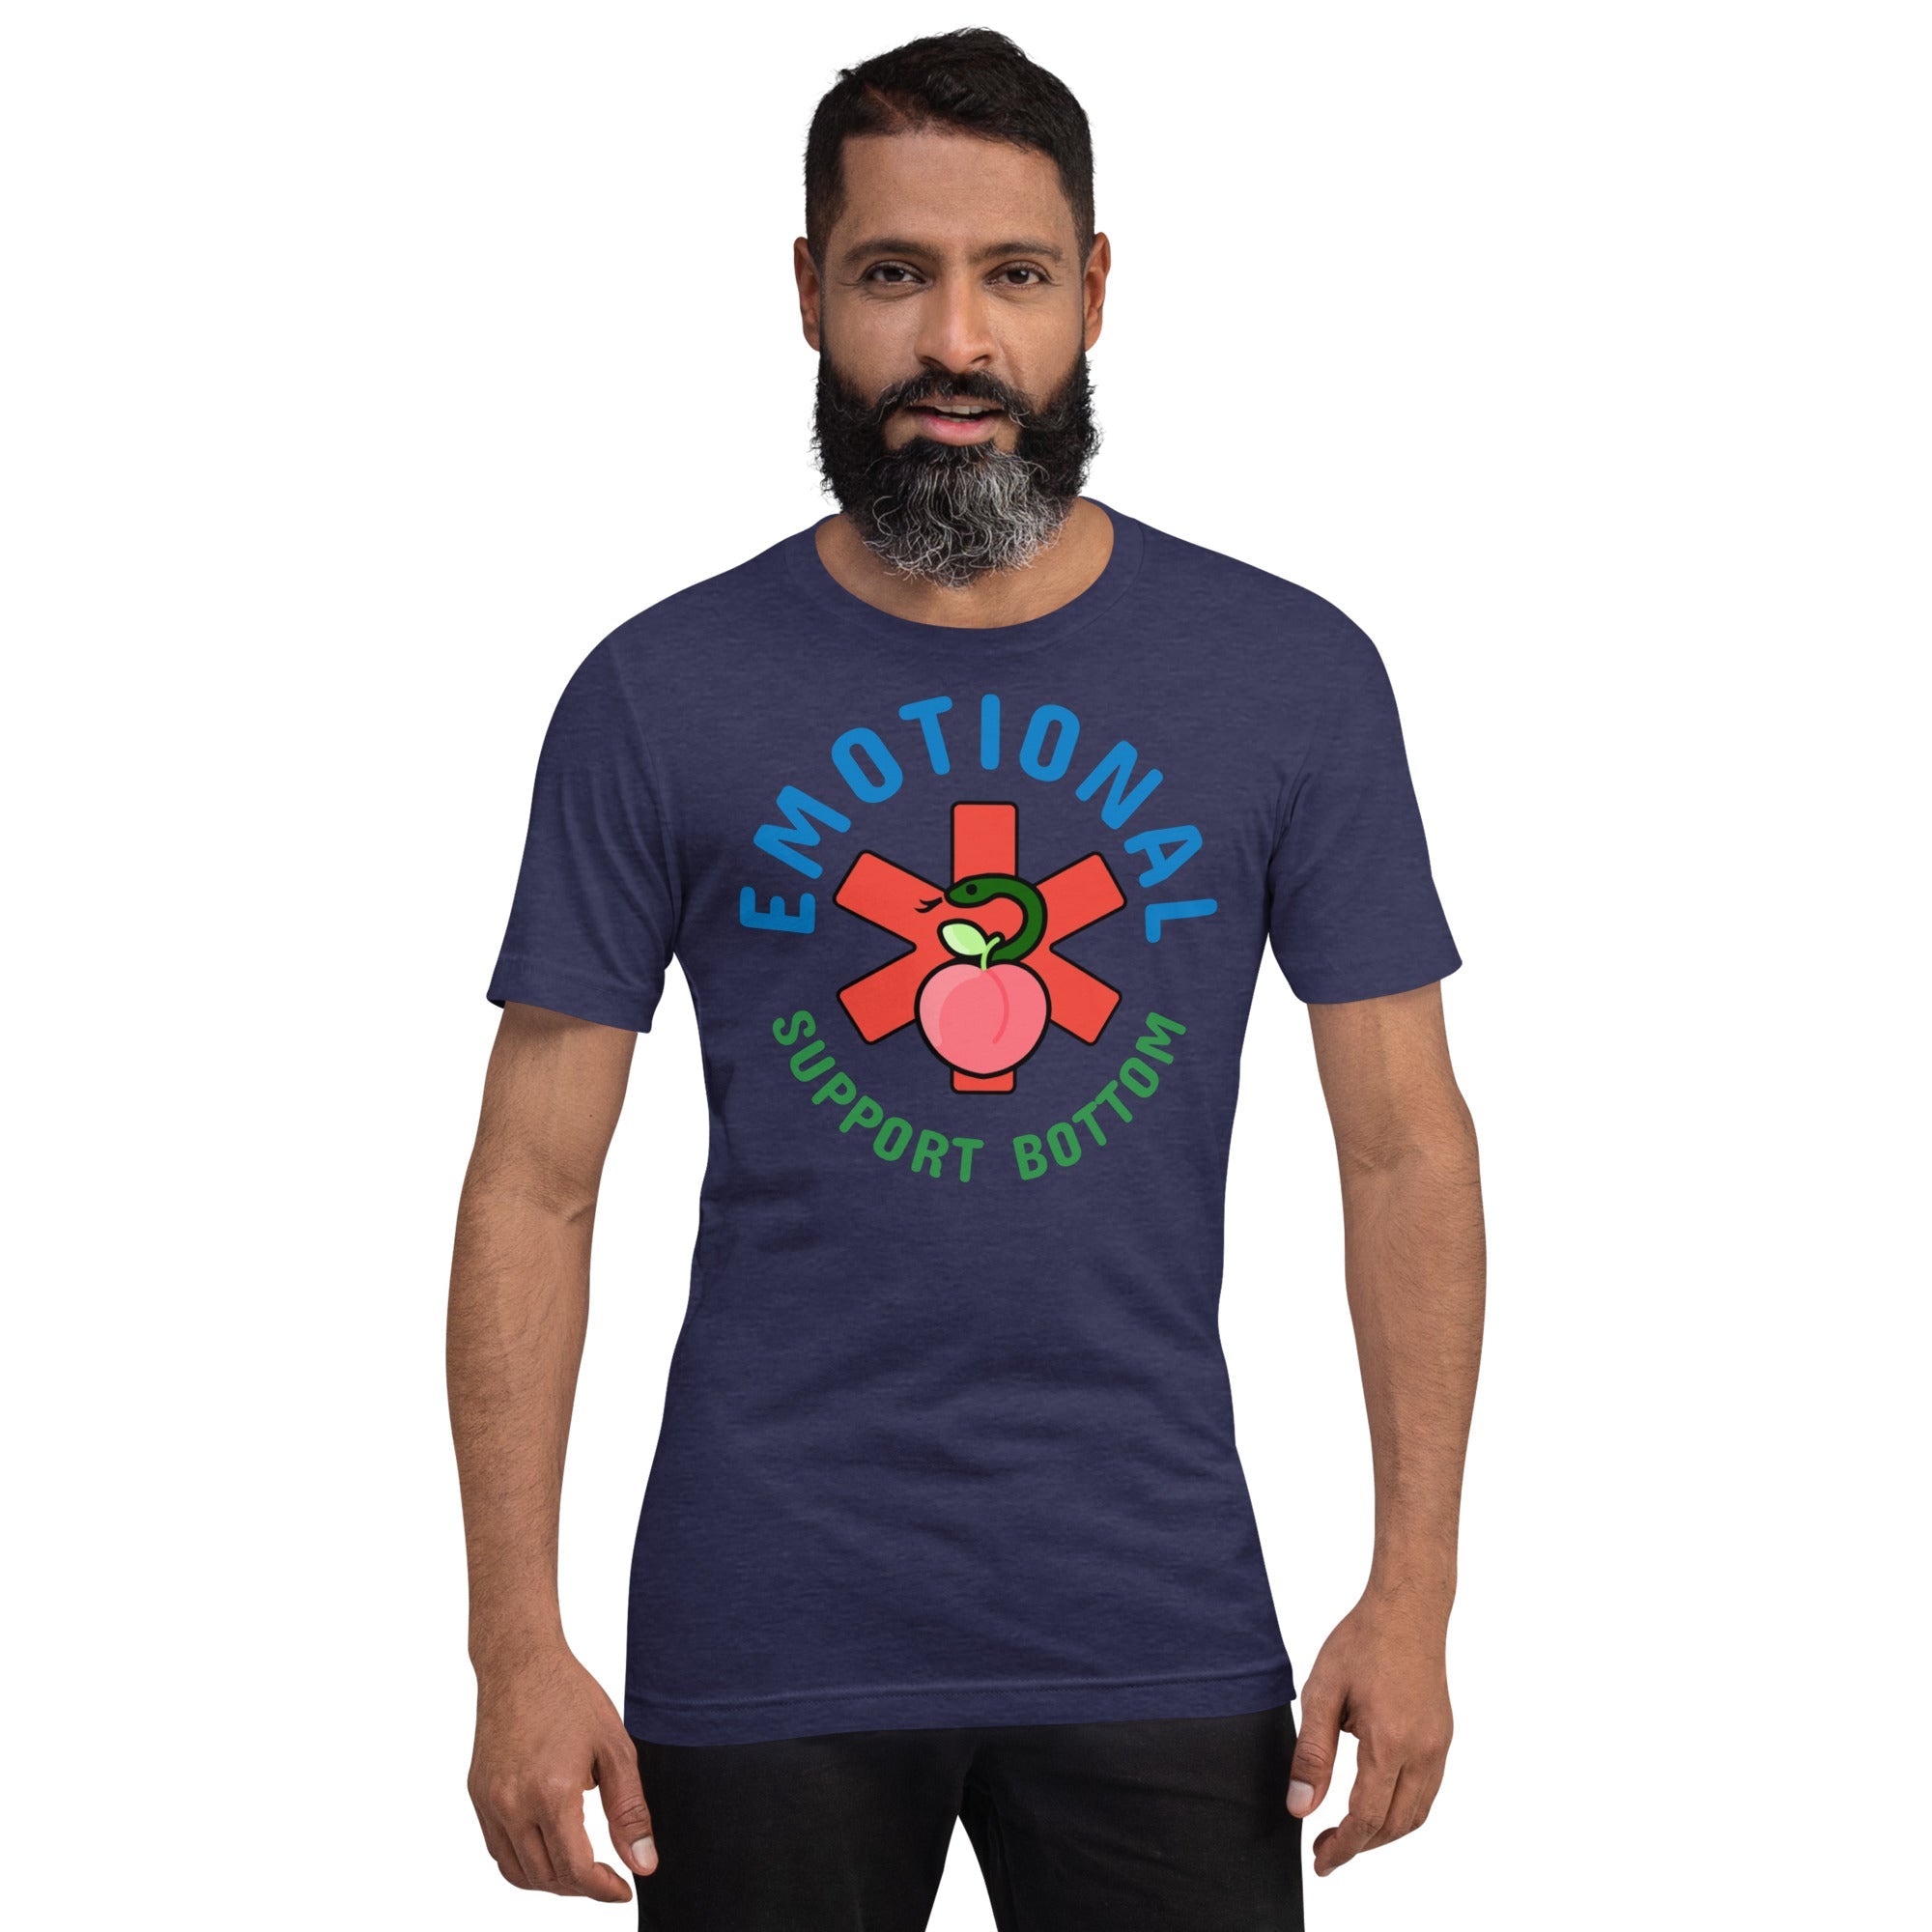 Emotional Support Nuggets T-shirt -  Ireland